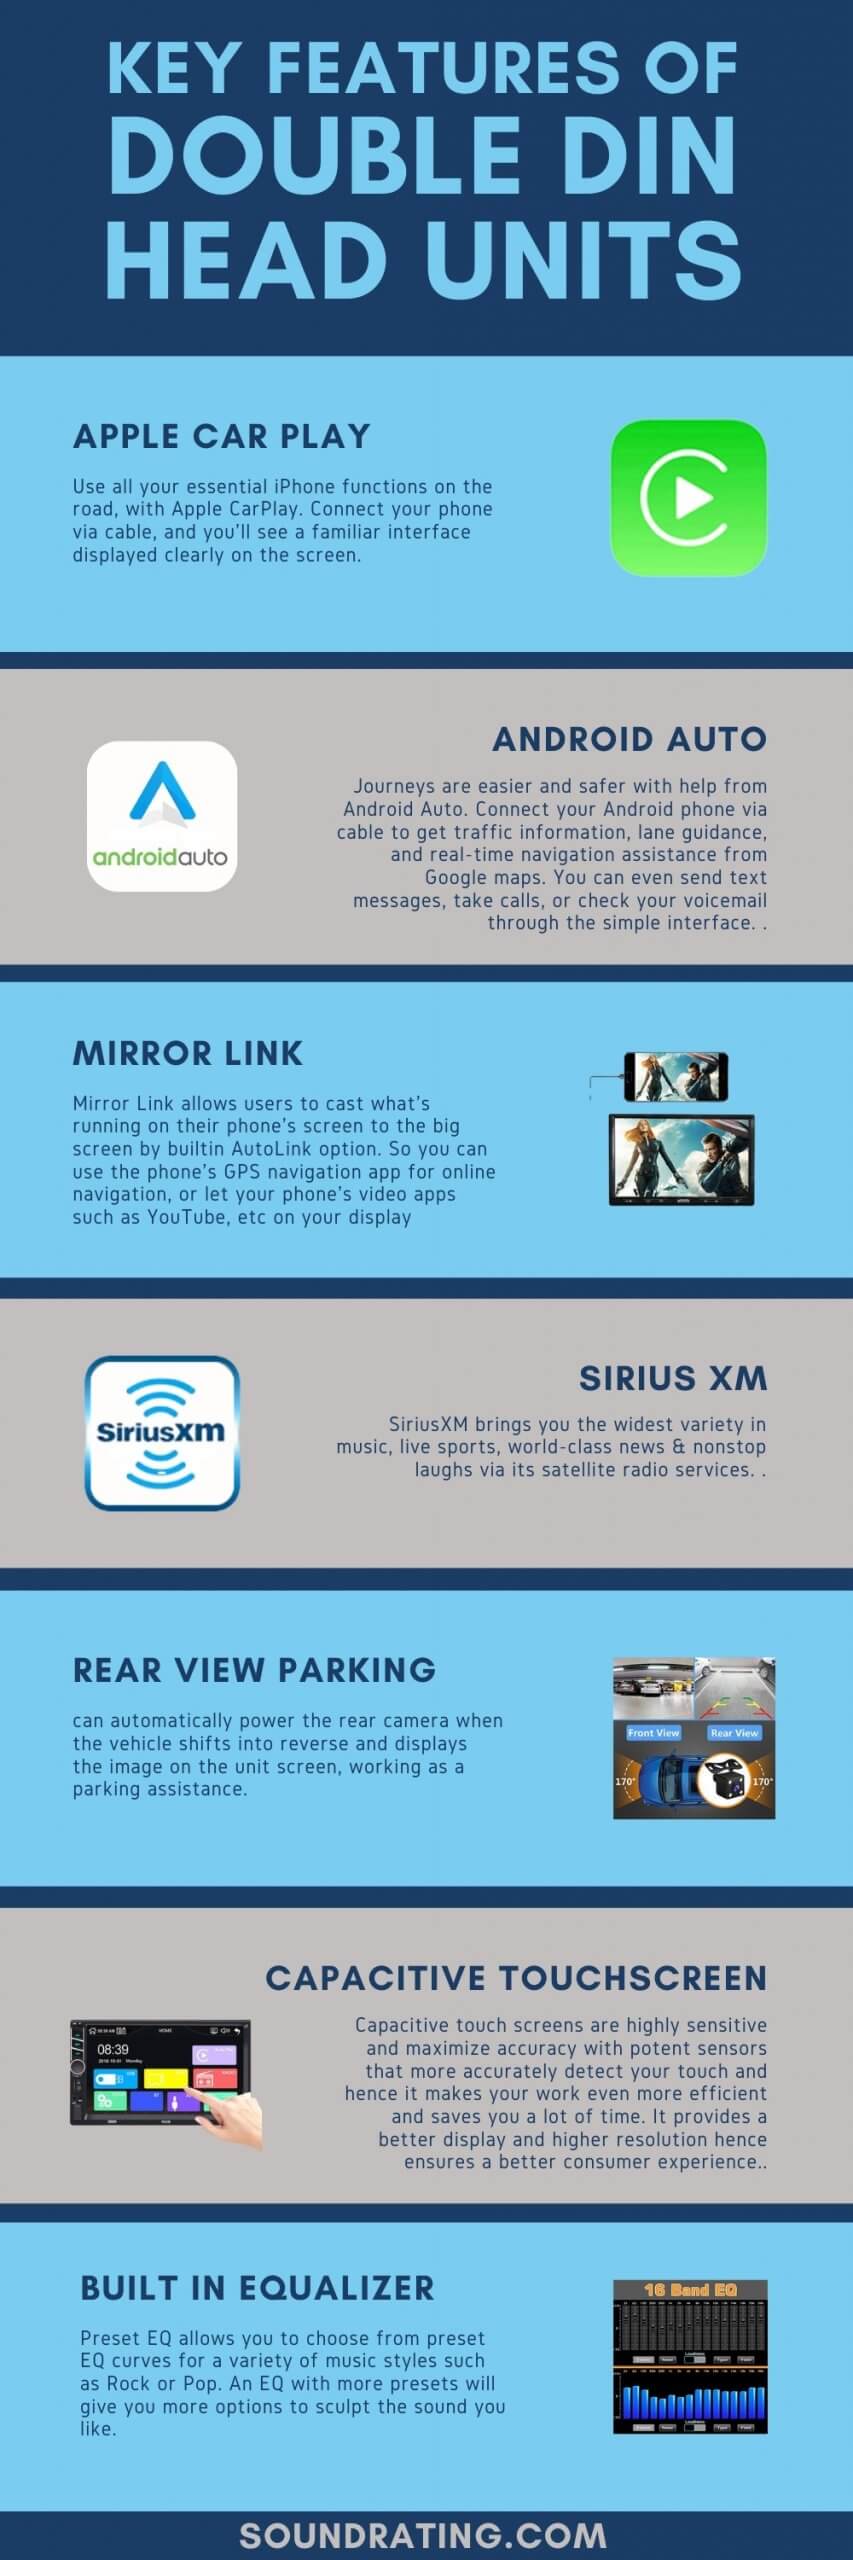 best features of double din head units infographic